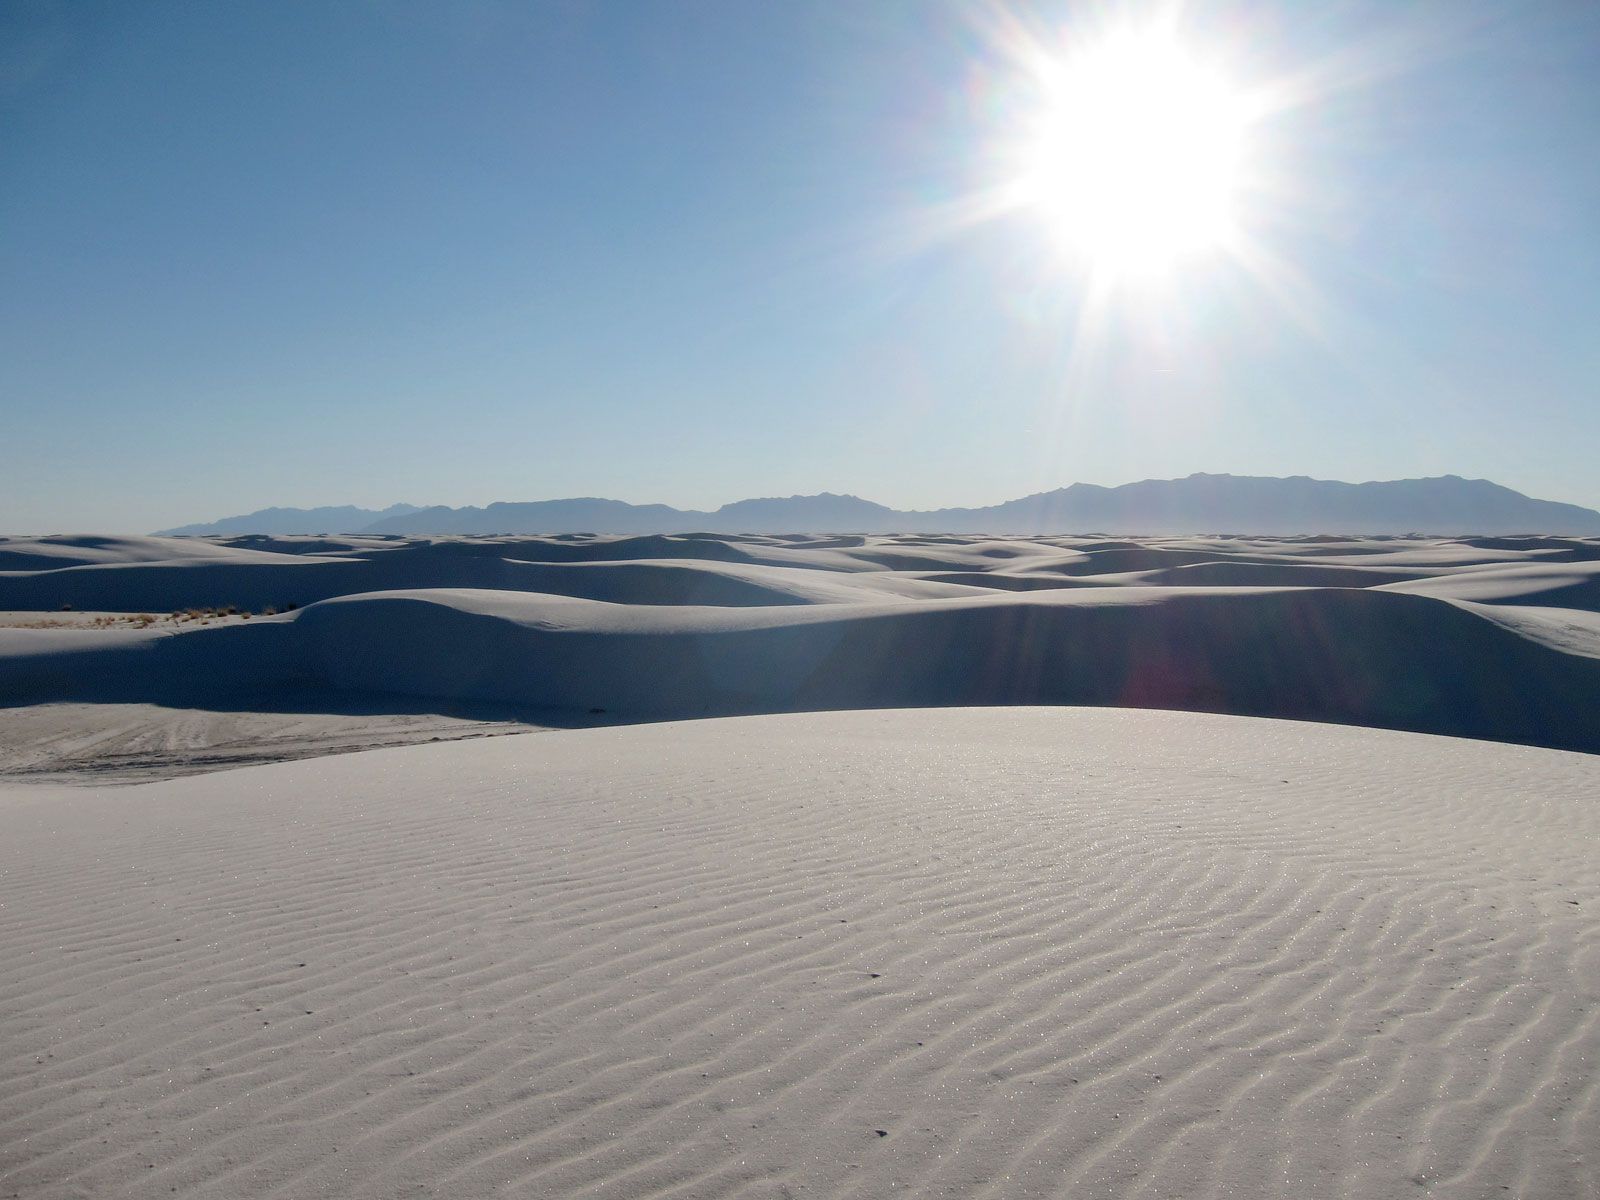 Visitor's Guide to White Sands National Monument in New Mexico